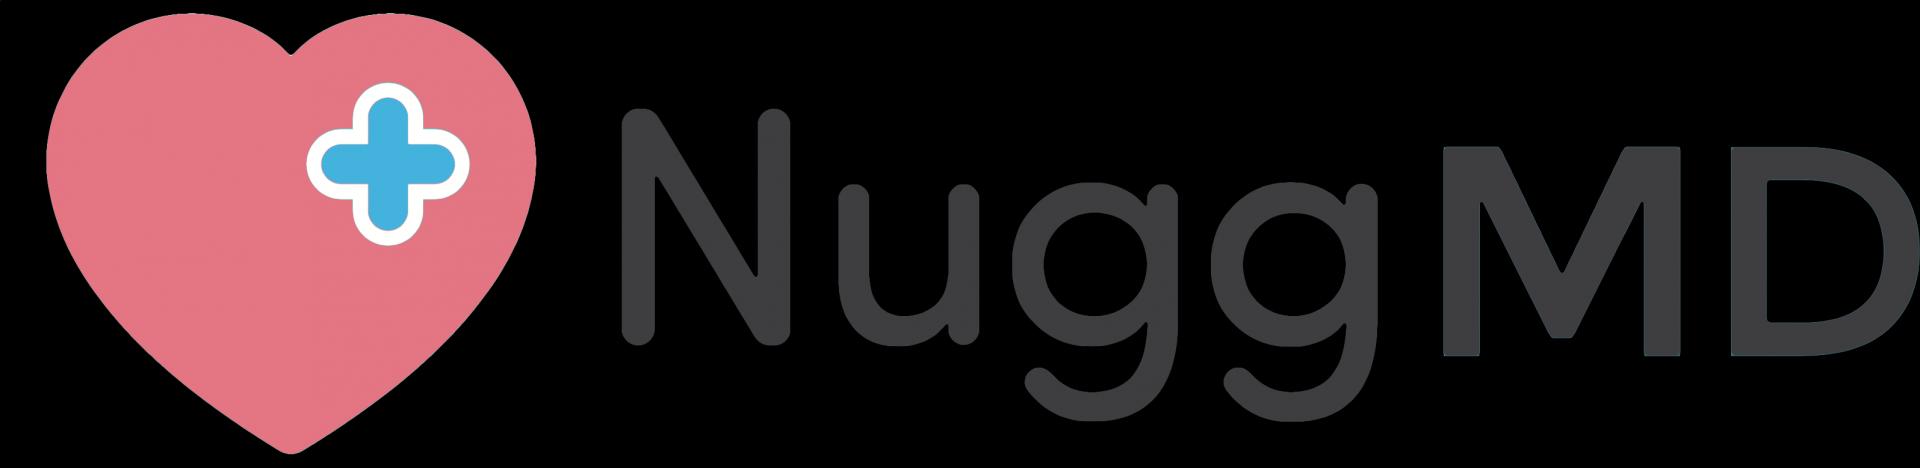 Photo for: Industry-Leading Telemedicine Platform NuggMD is Improving Cannabis Access in Oklahoma